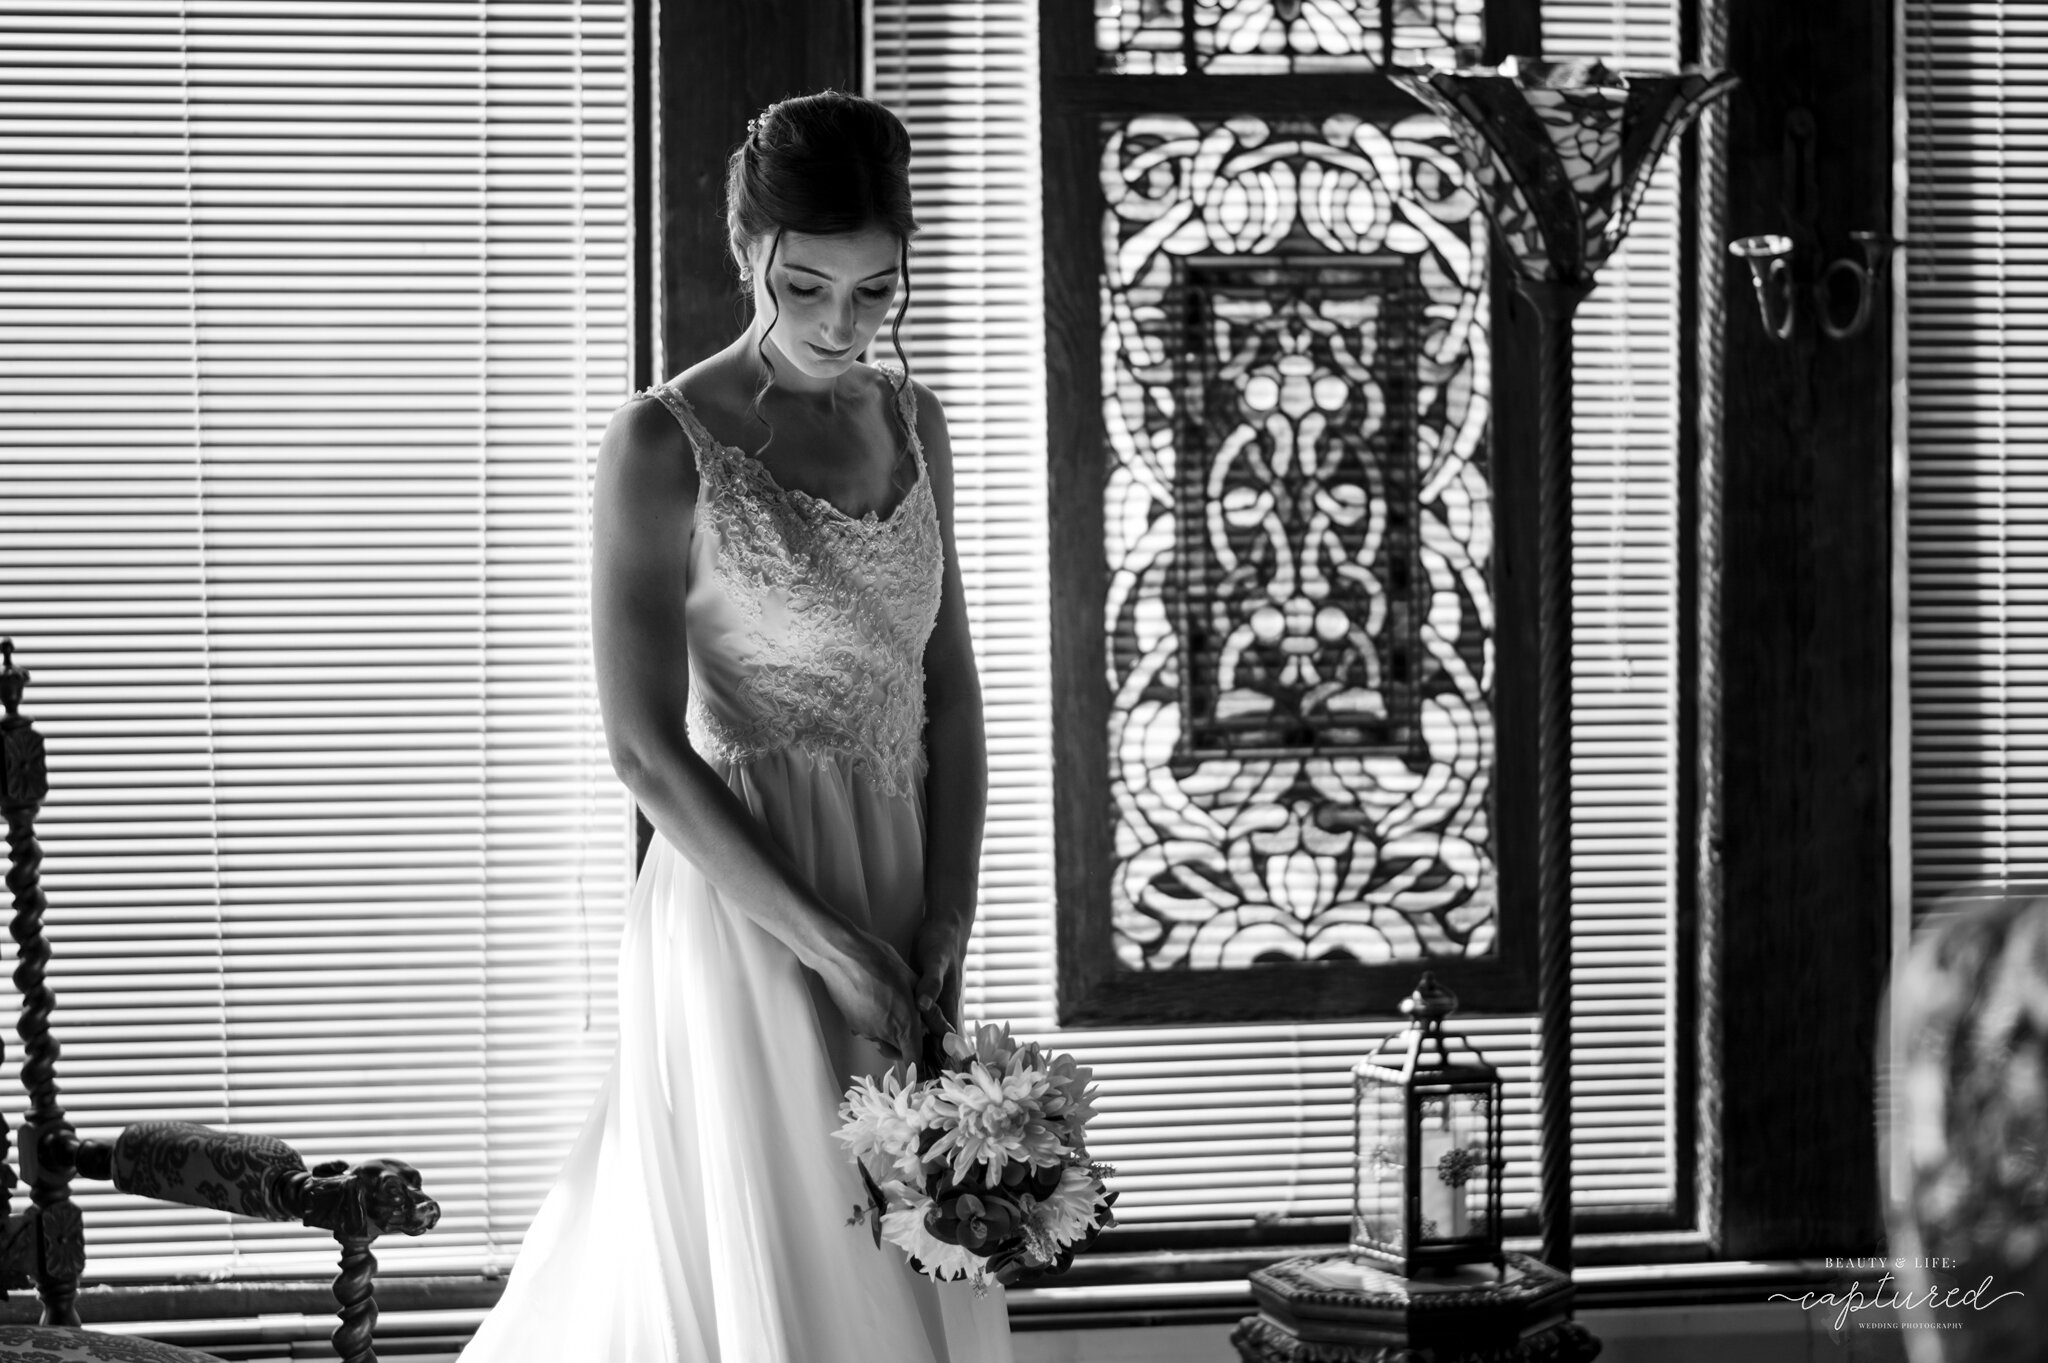 Beauty_and_Life_Captured__Elizabeth_and_Taylor_Wedding-18.jpg